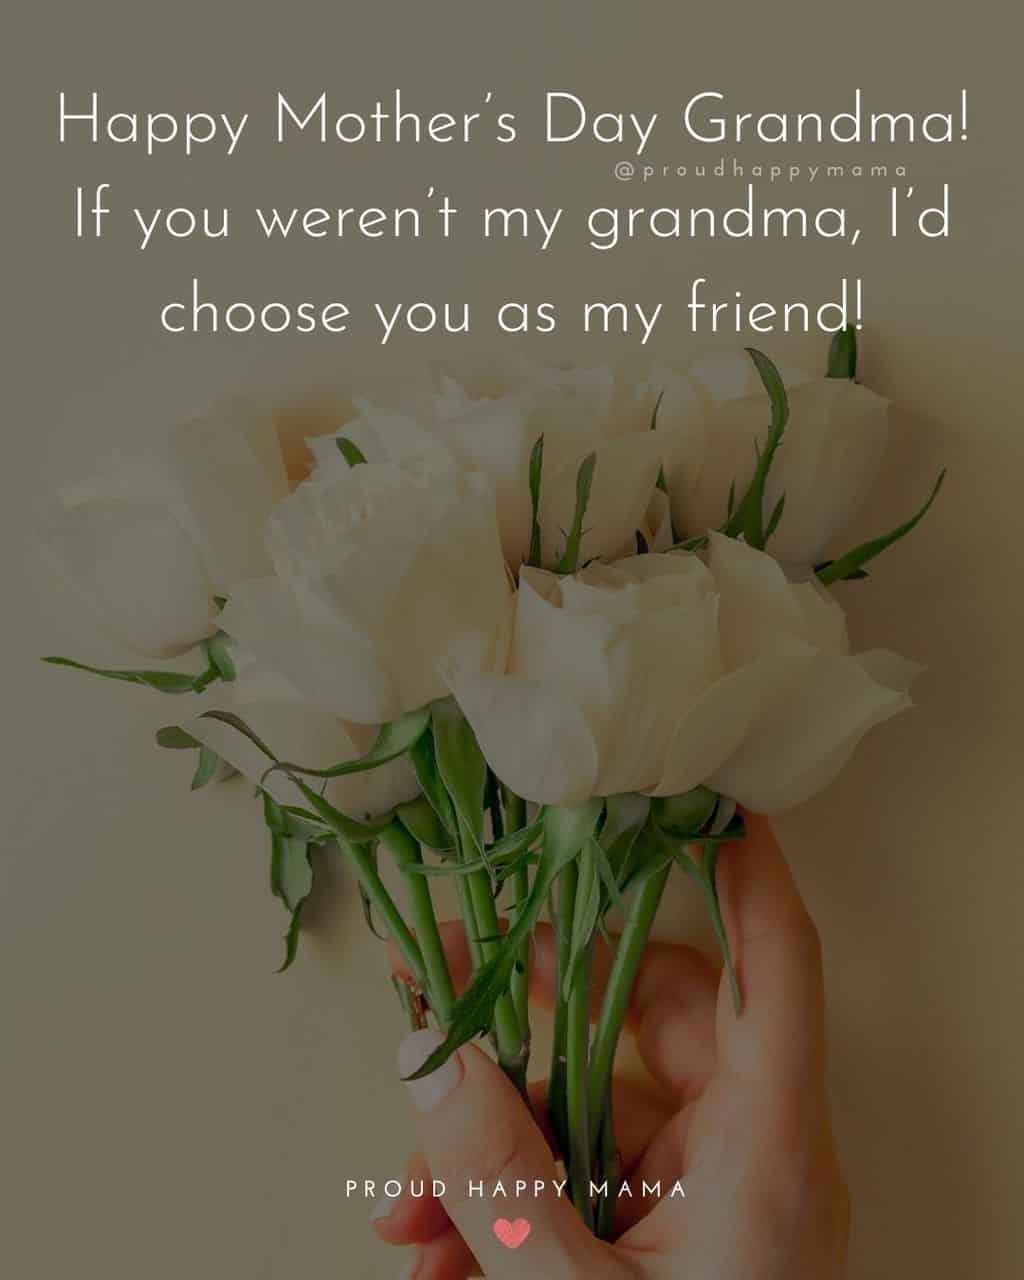 Happy Mothers Day Quotes To Grandma - Happy Mother’s Day Grandma! If you weren’t my grandma, I’d choose you as my